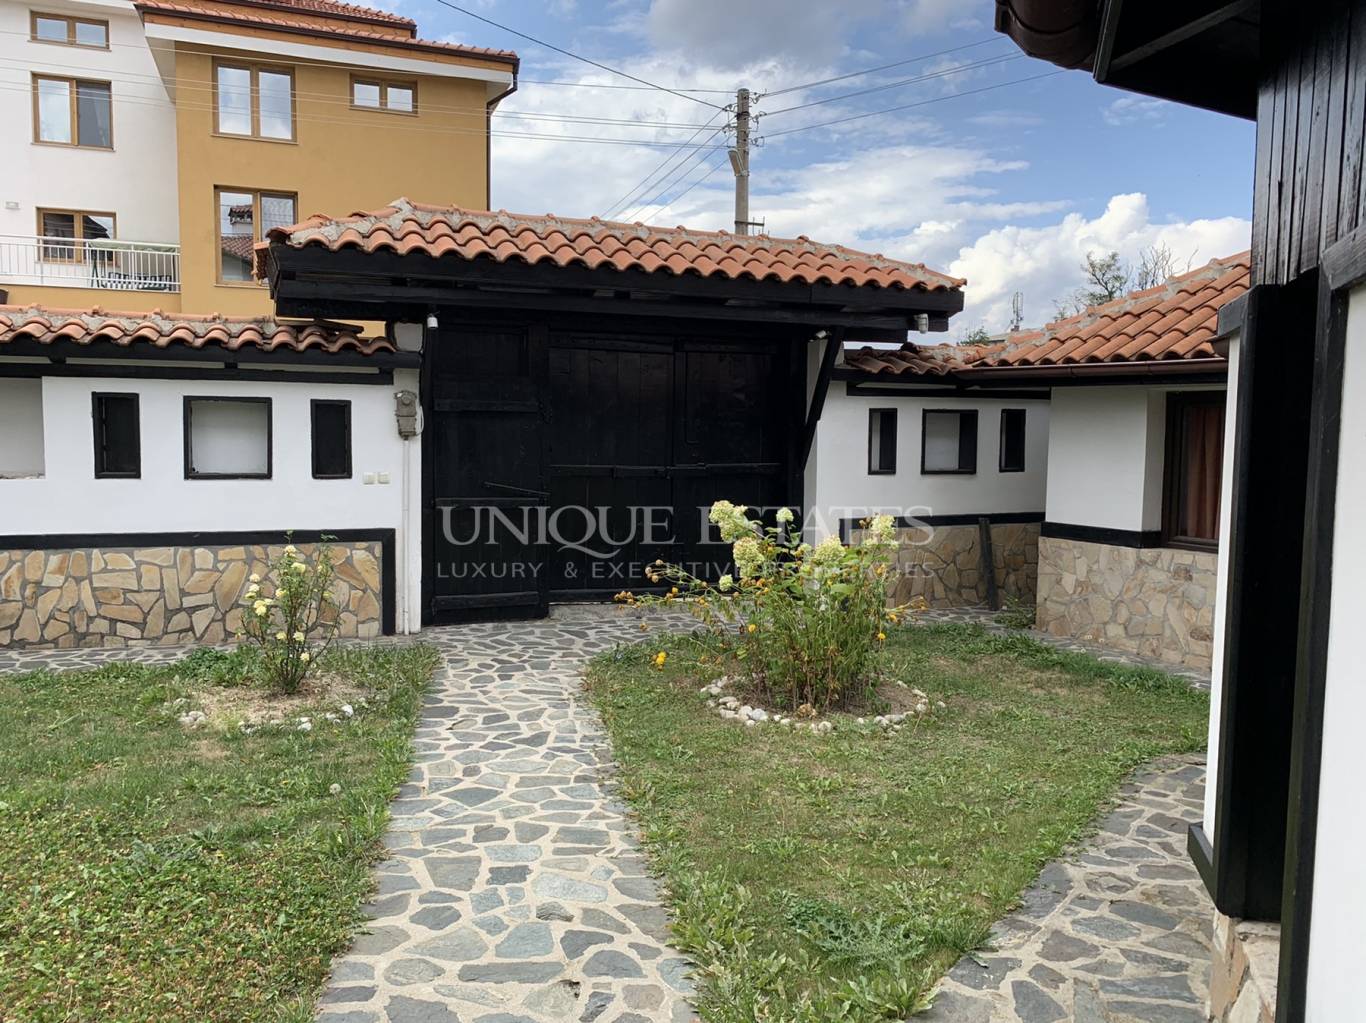 House for sale in Bansko,  with listing ID: K14981 - image 2